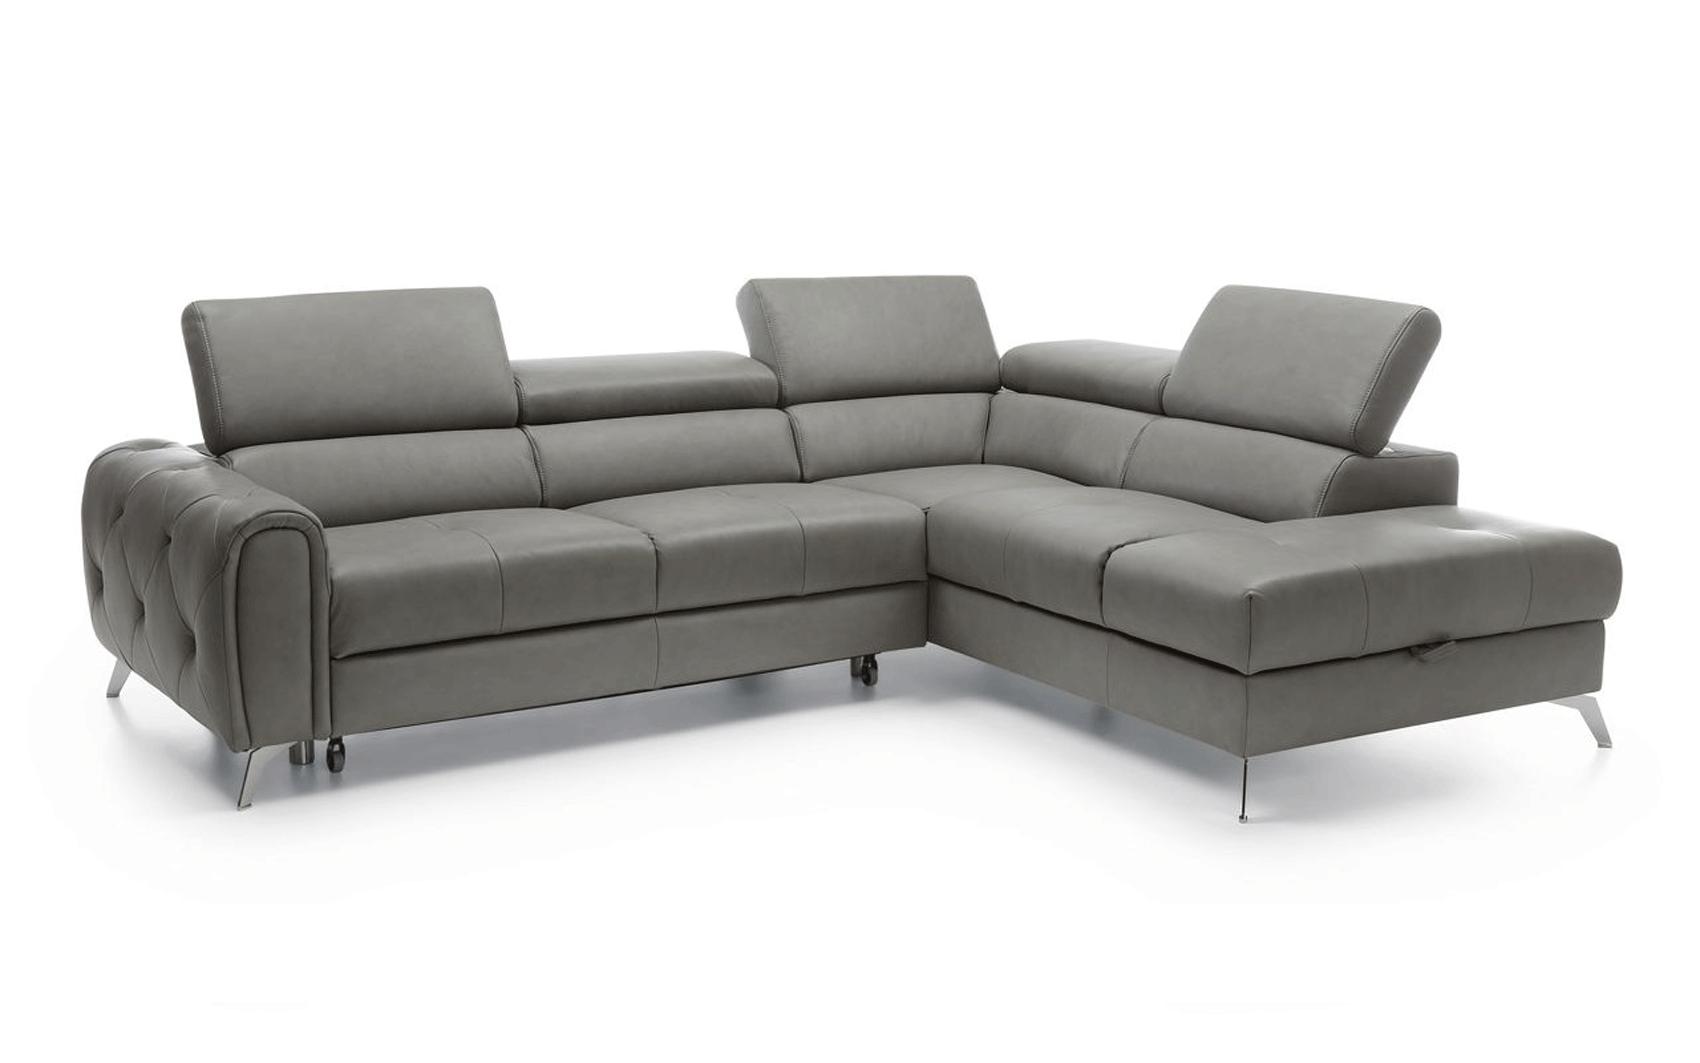 ESF Camelia Sectional Sofa Bed